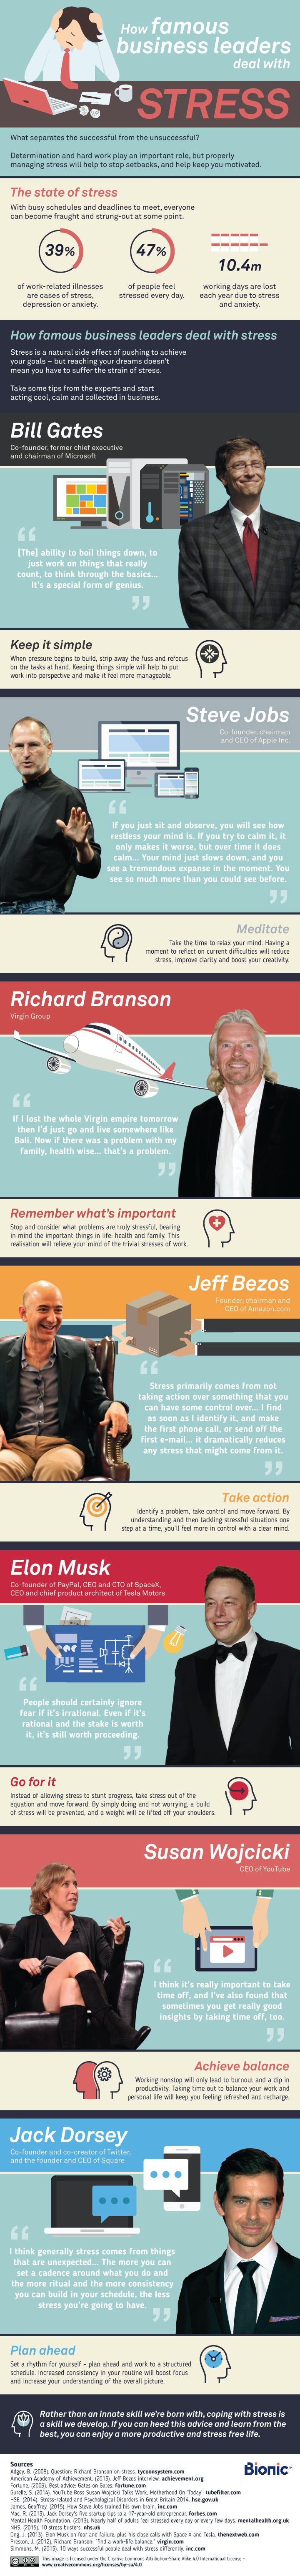 Infographic showing famous business leaders and their tips for dealing with stress